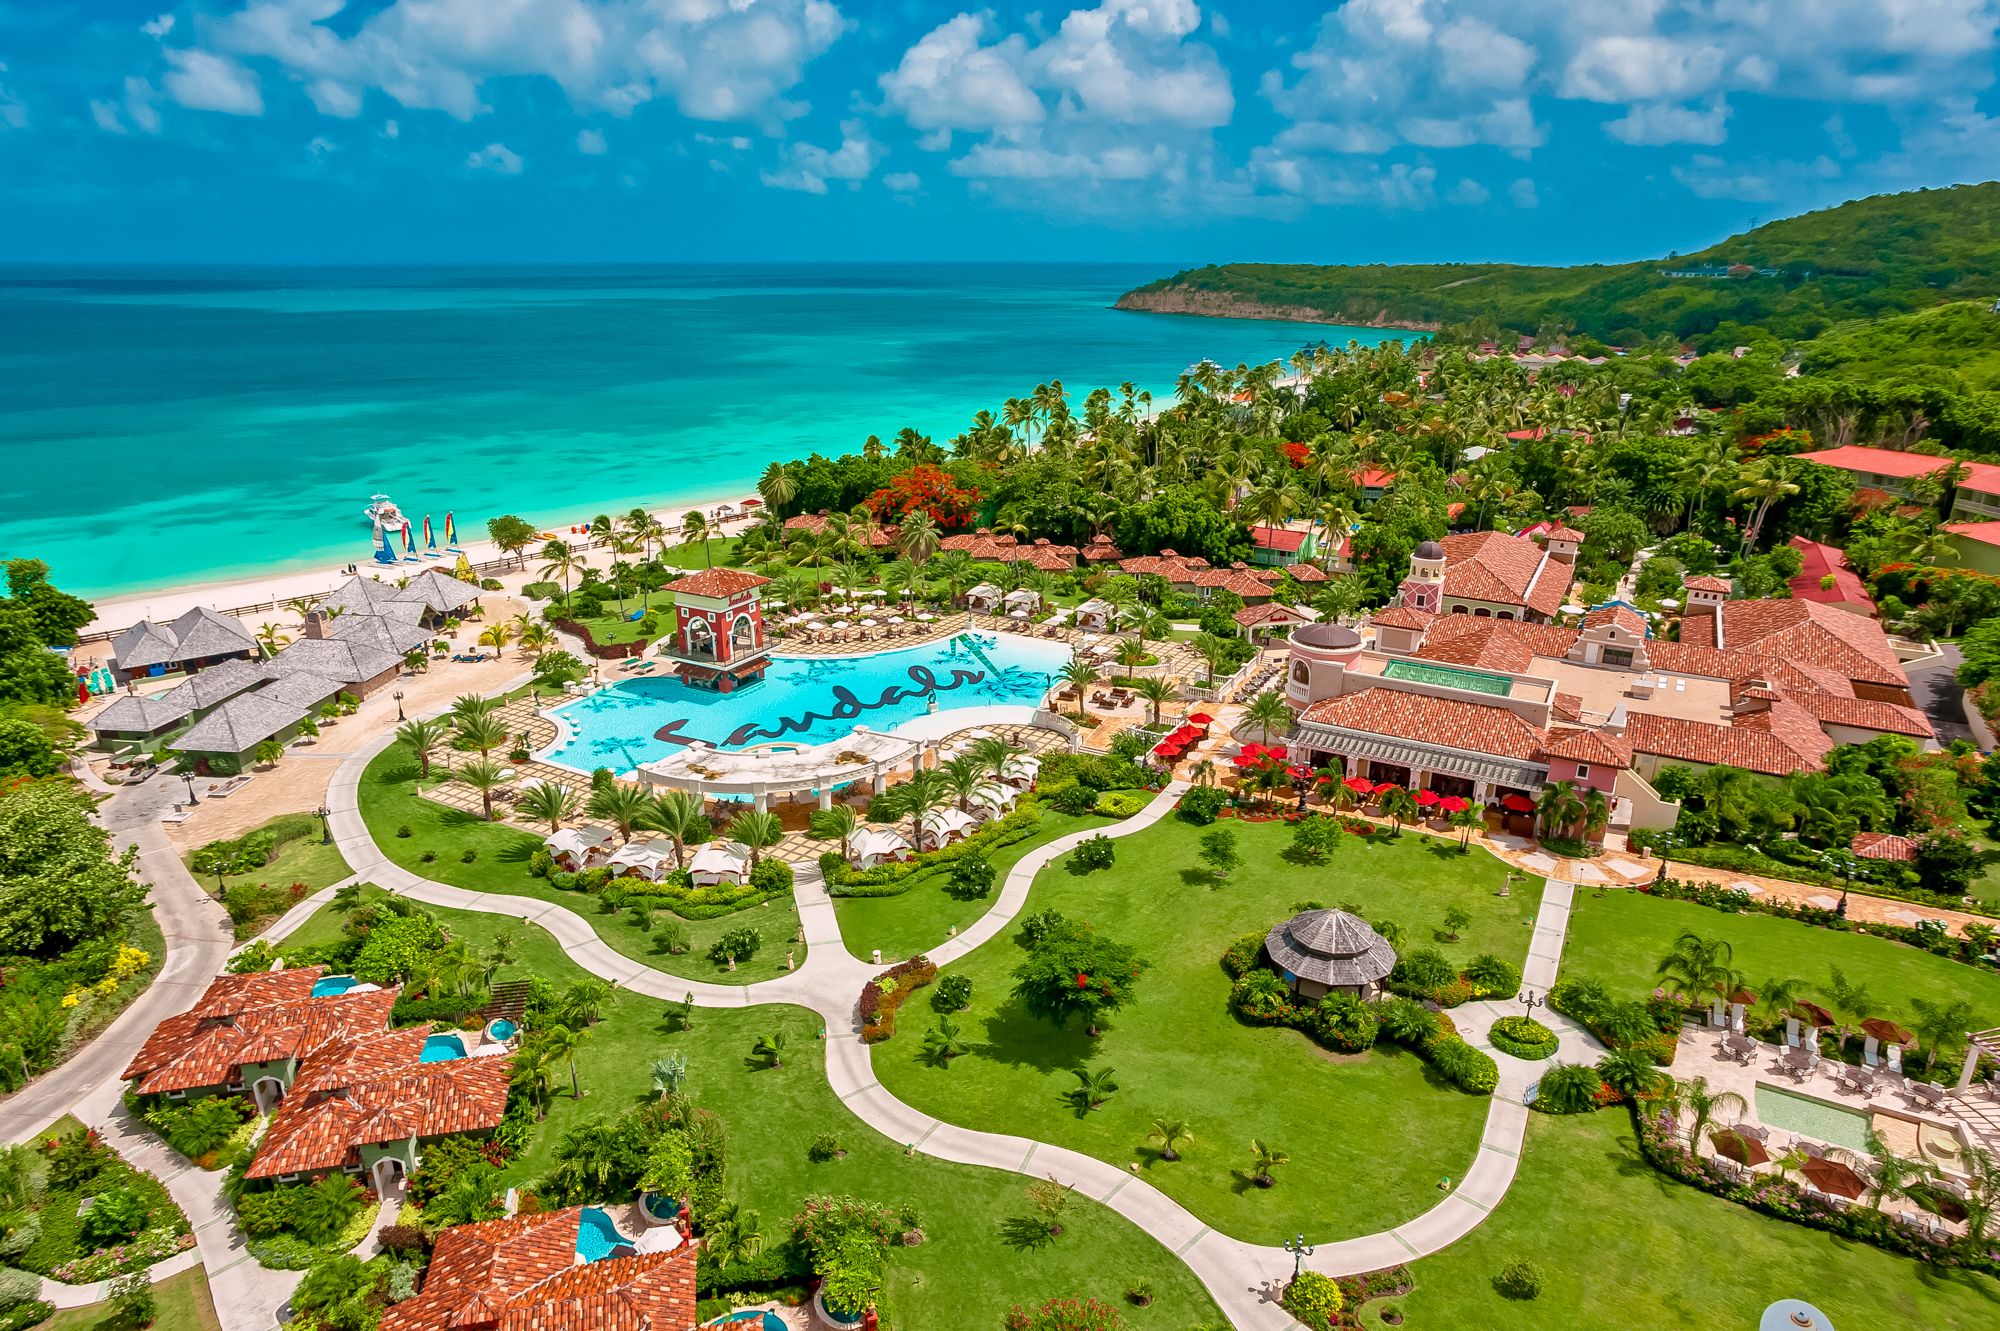 Social Distancing Is Always A Luxury At Sandals Resorts | Sandals